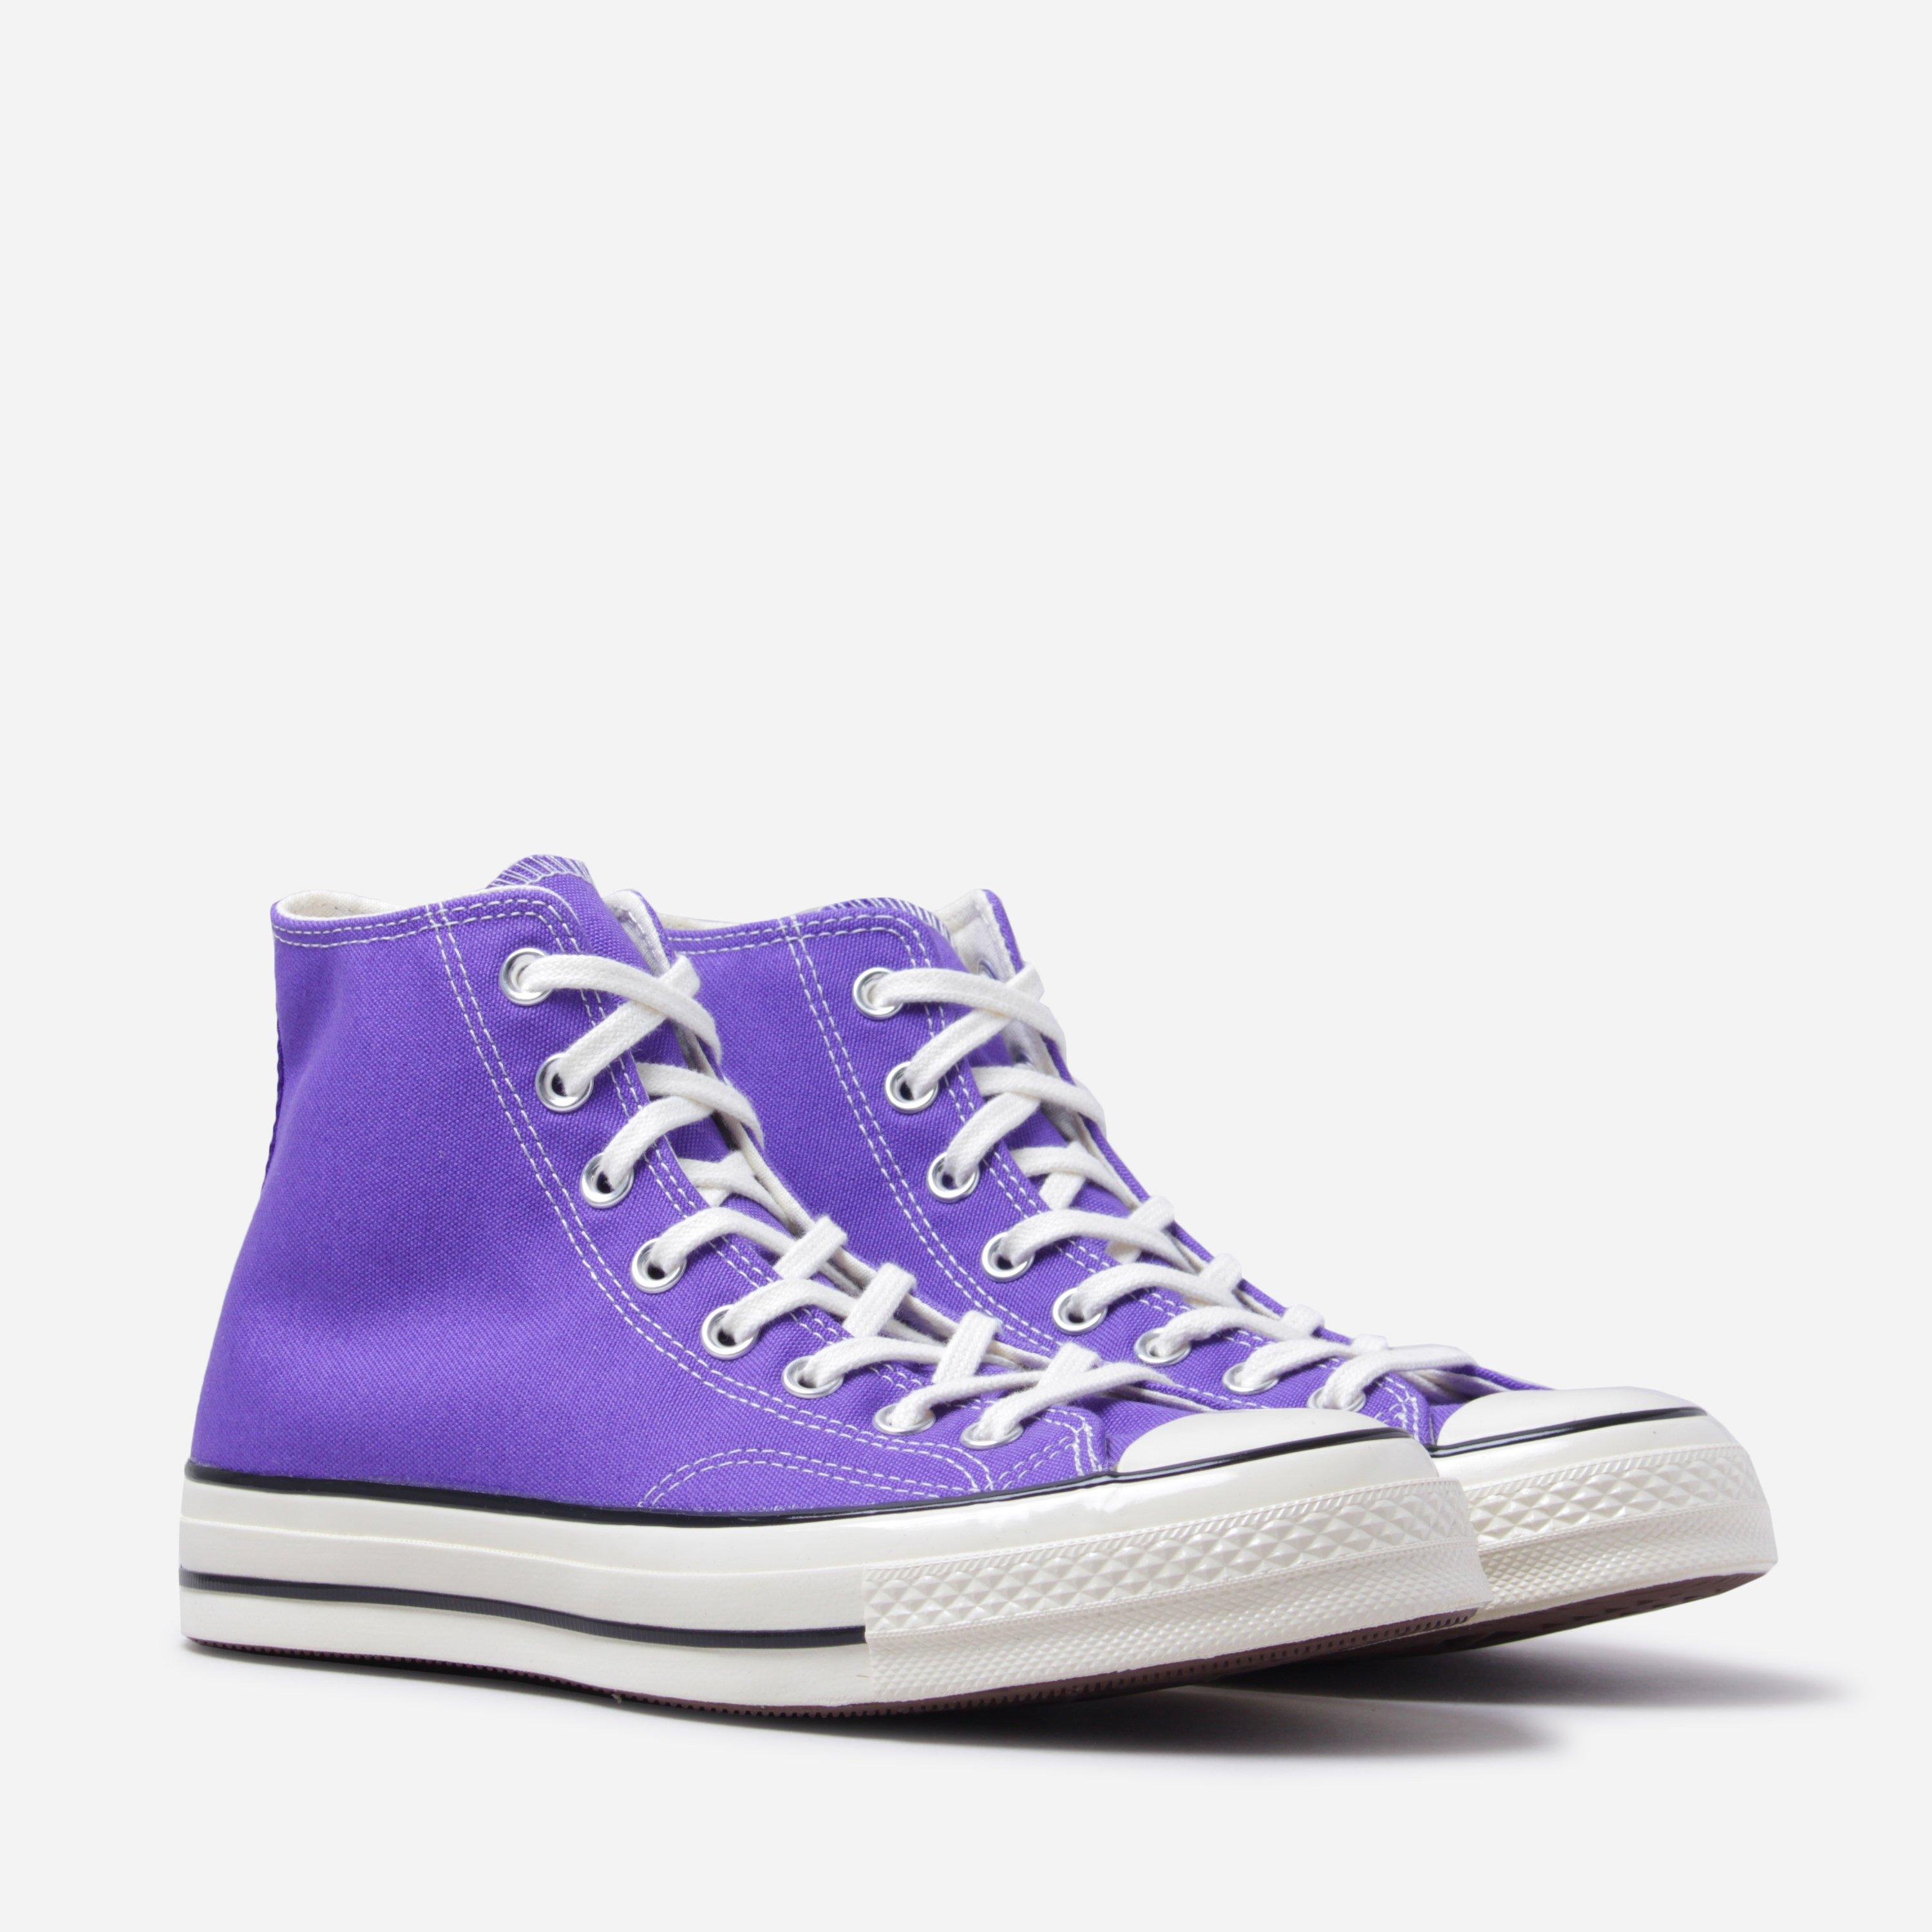 mens converse trainers sale